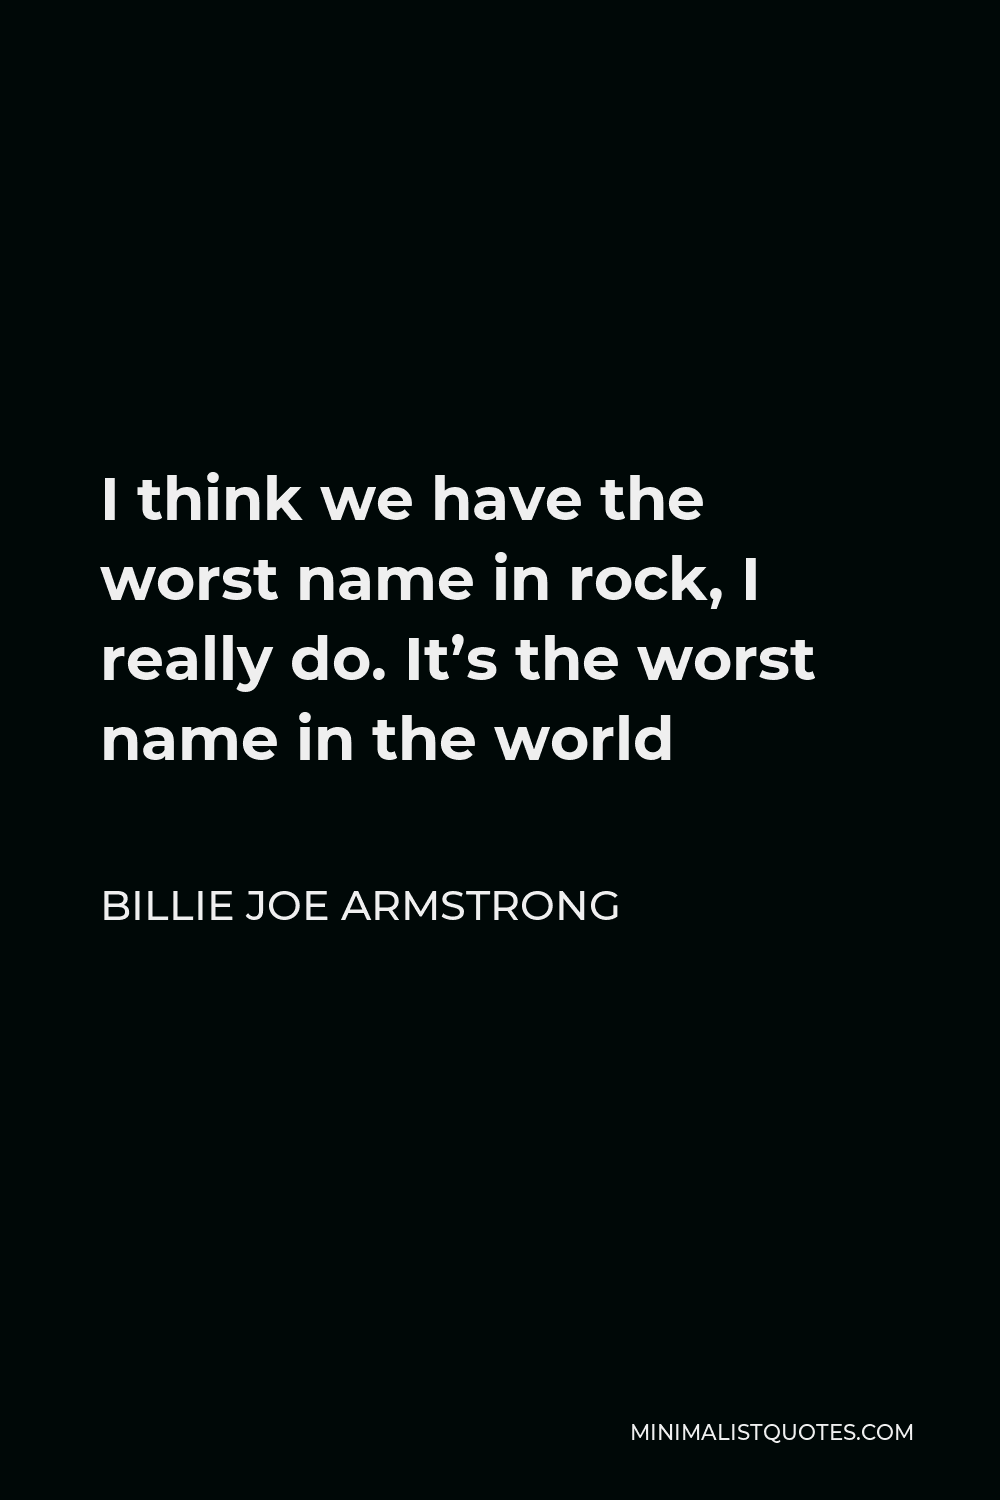 Billie Joe Armstrong Quote - I think we have the worst name in rock, I really do. It’s the worst name in the world